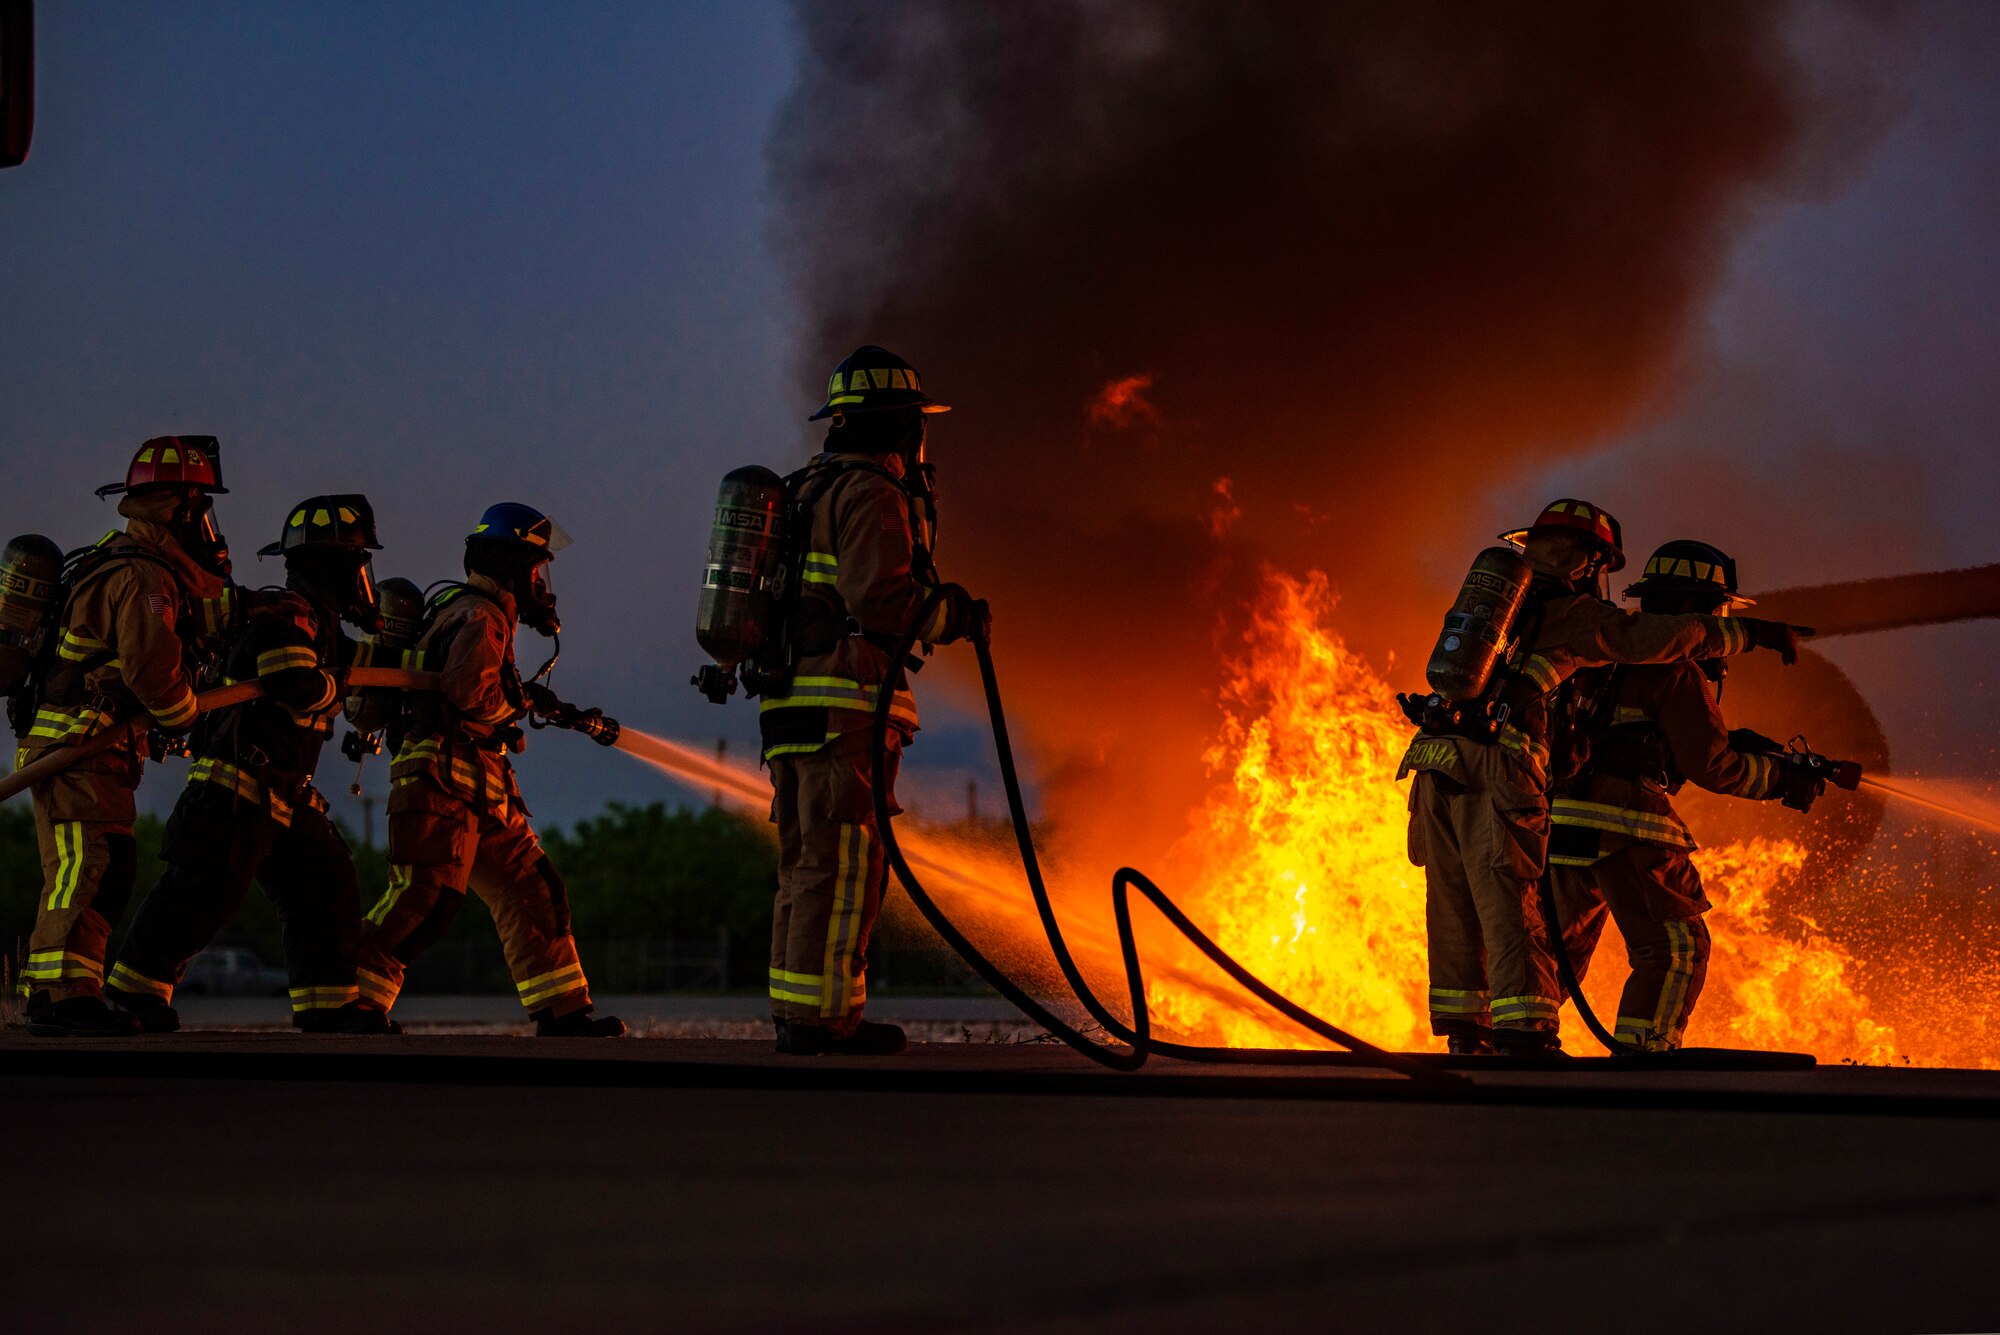 Firefighters assigned to the 7th Civil Engineer Squadron and 512th CES extinguish flames during an aircraft fire training at Dyess Air Force Base, Texas, May 4, 2021. Firefighters assigned to the 7th and 512th CES conducted the live fire training with firefighters from the Abilene Regional Airport’s aircraft rescue team to enhance safety, proficiency and interoperability. (U.S. Air Force photo by Airman 1st Class Colin Hollowell)